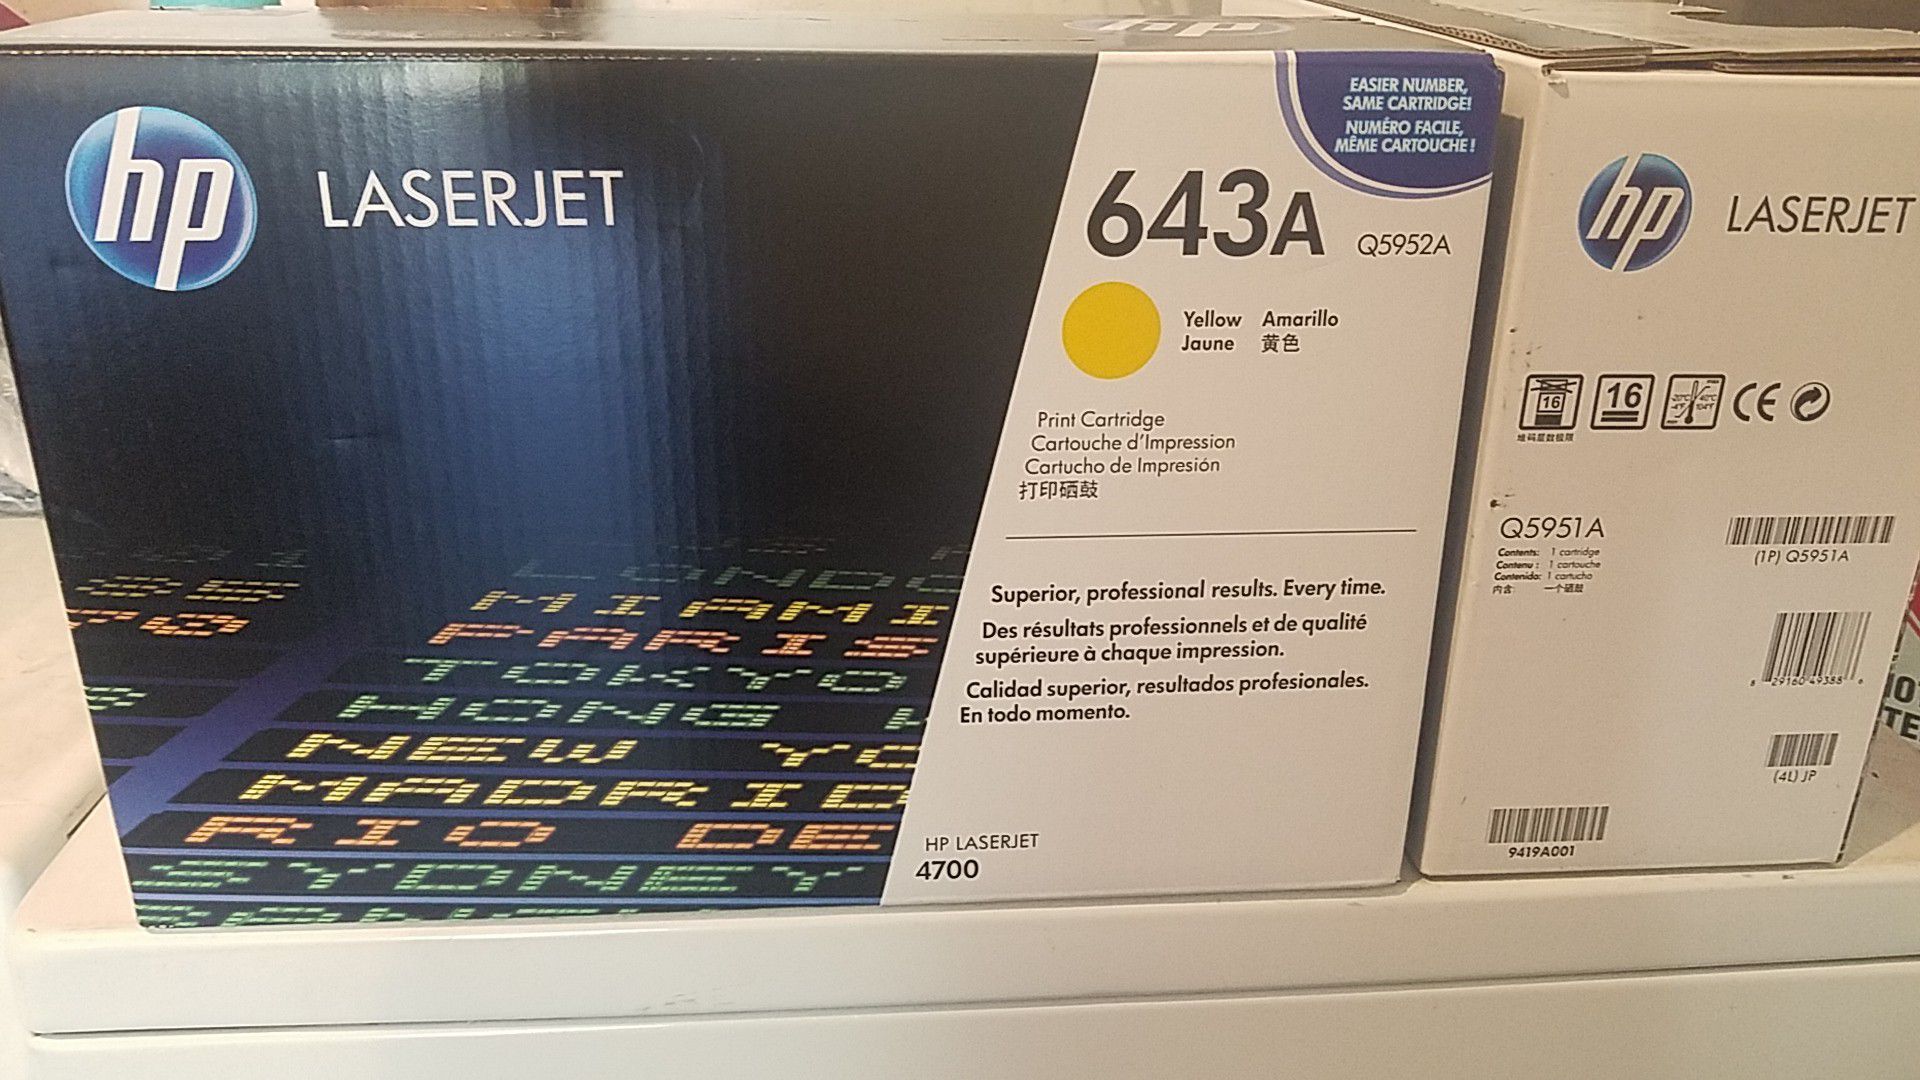 HP Printer ink cartridges brand new never been open. We have a total of 2 cases for one price